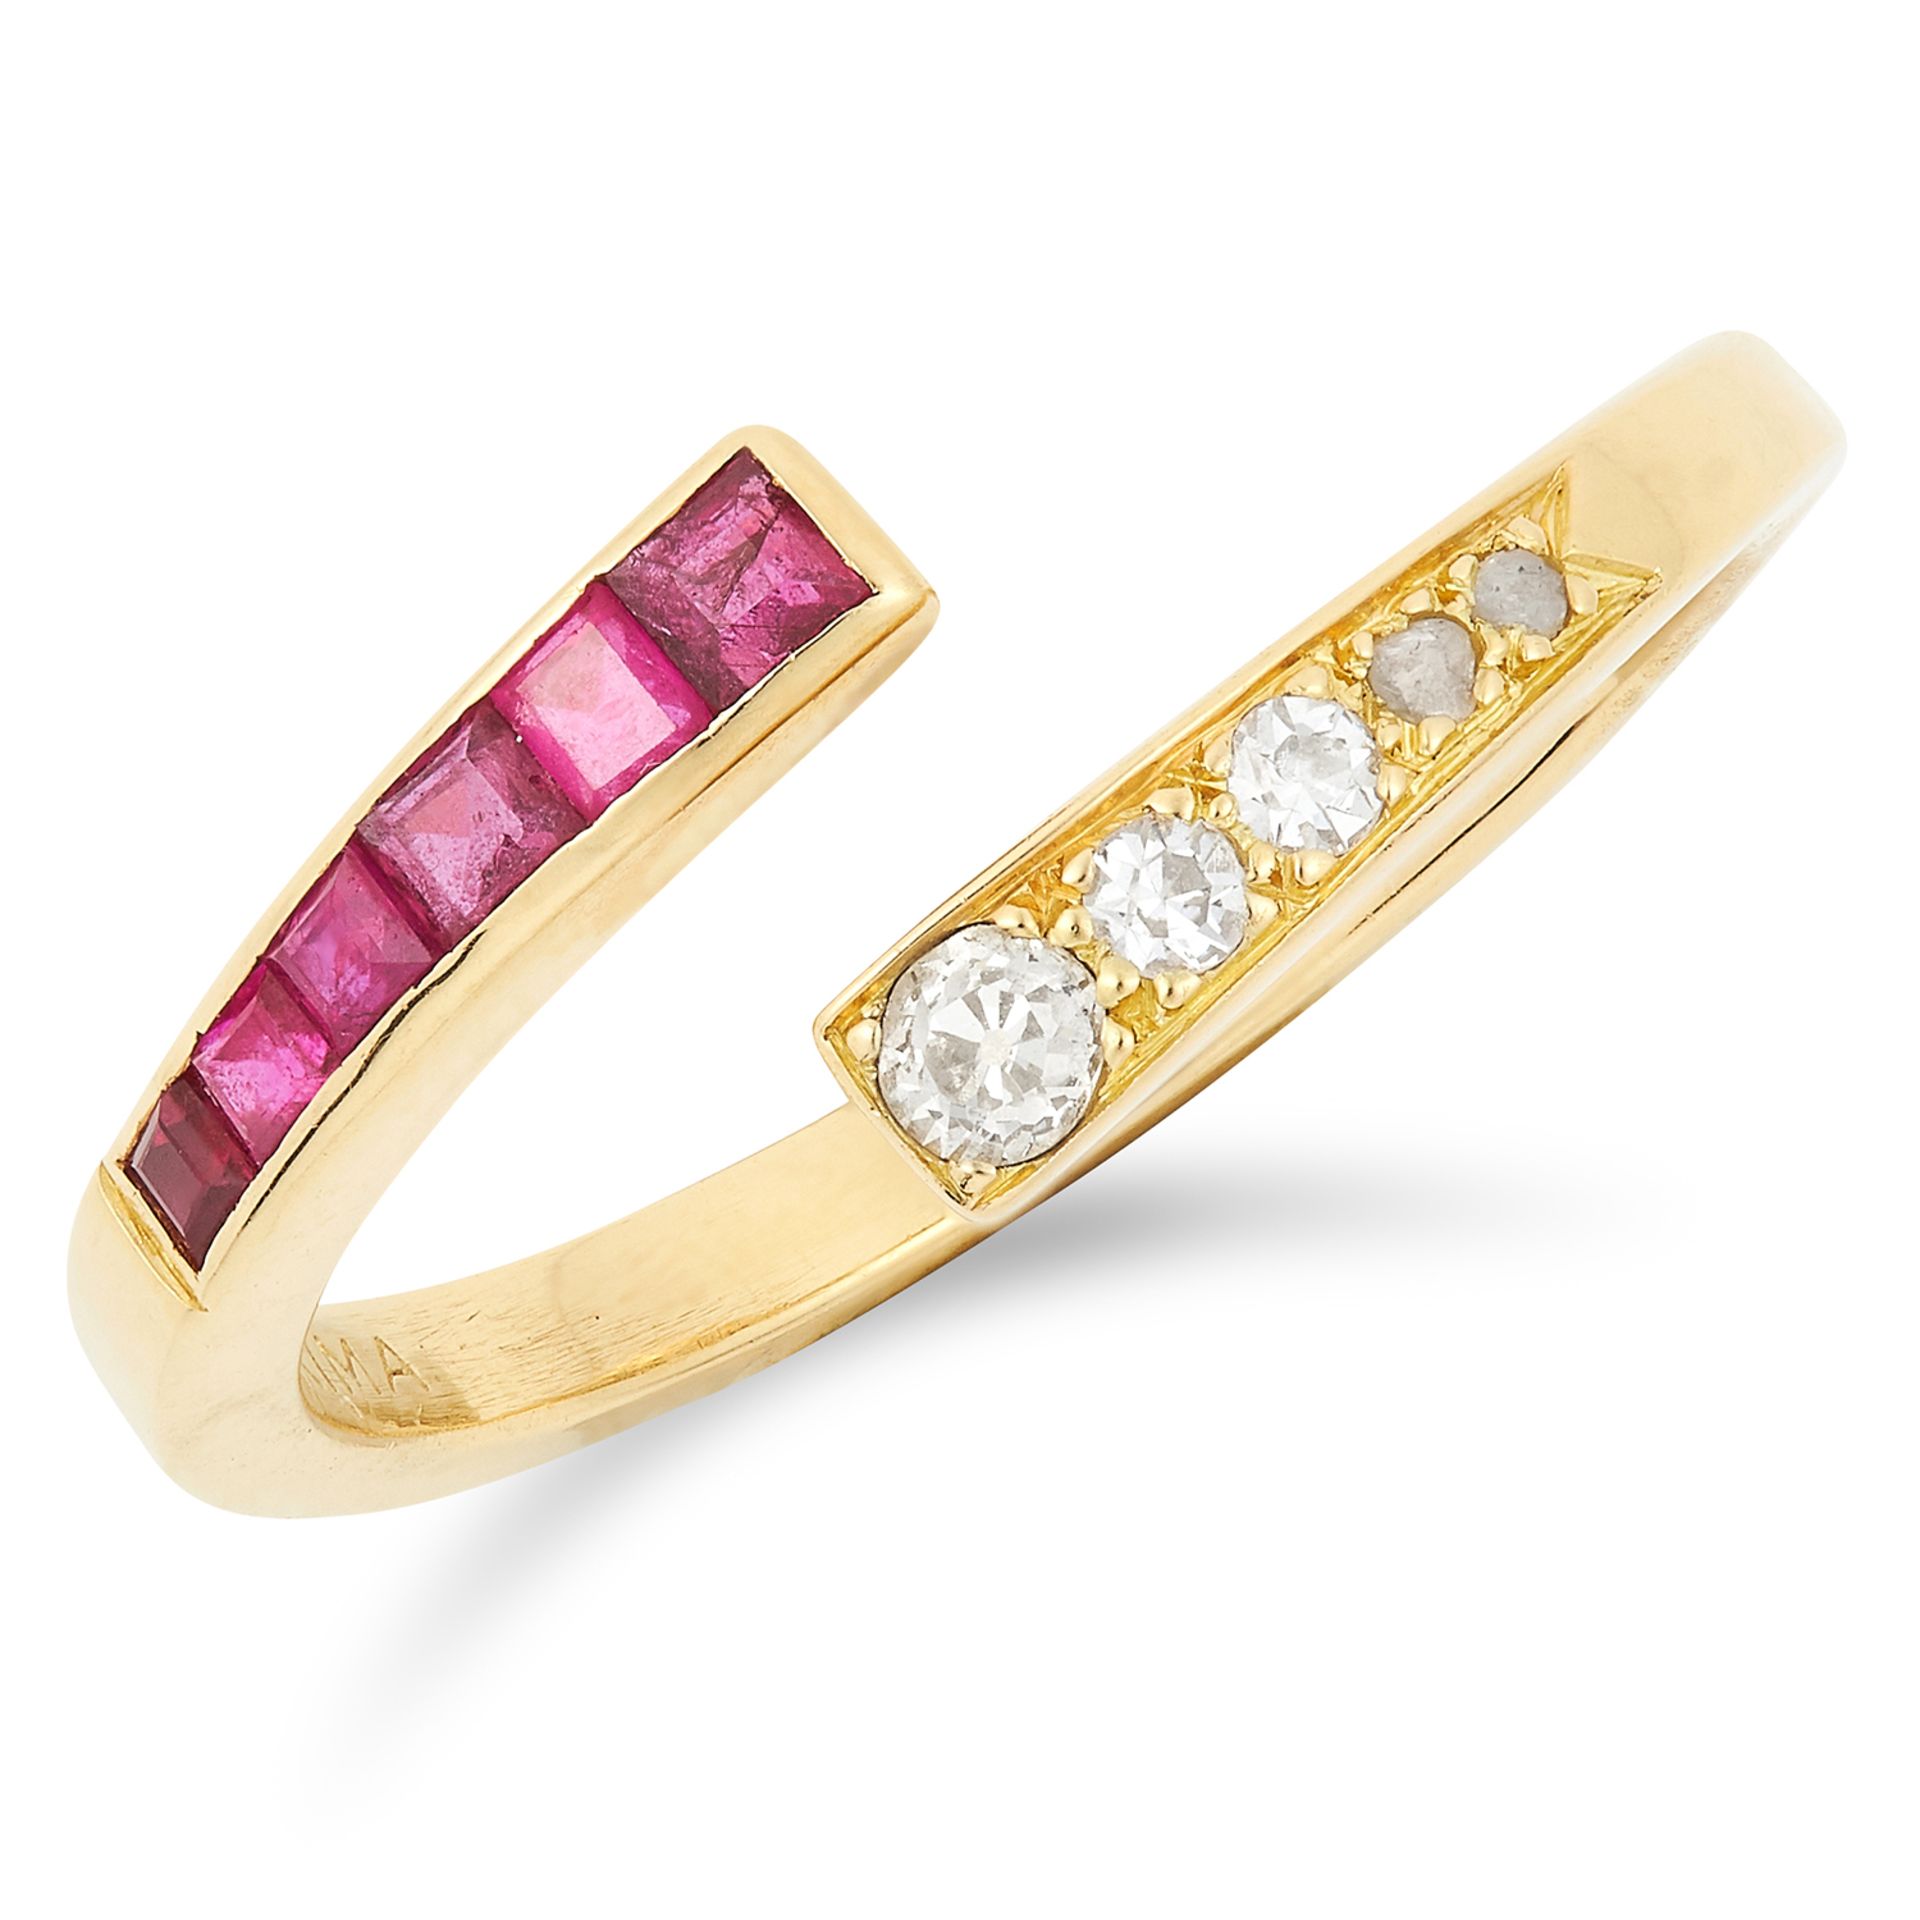 A RUBY AND DIAMOND OPEN BAND RING, ANDREW GRIMA, CIRCA 1960 set with round and rose cut diamonds and